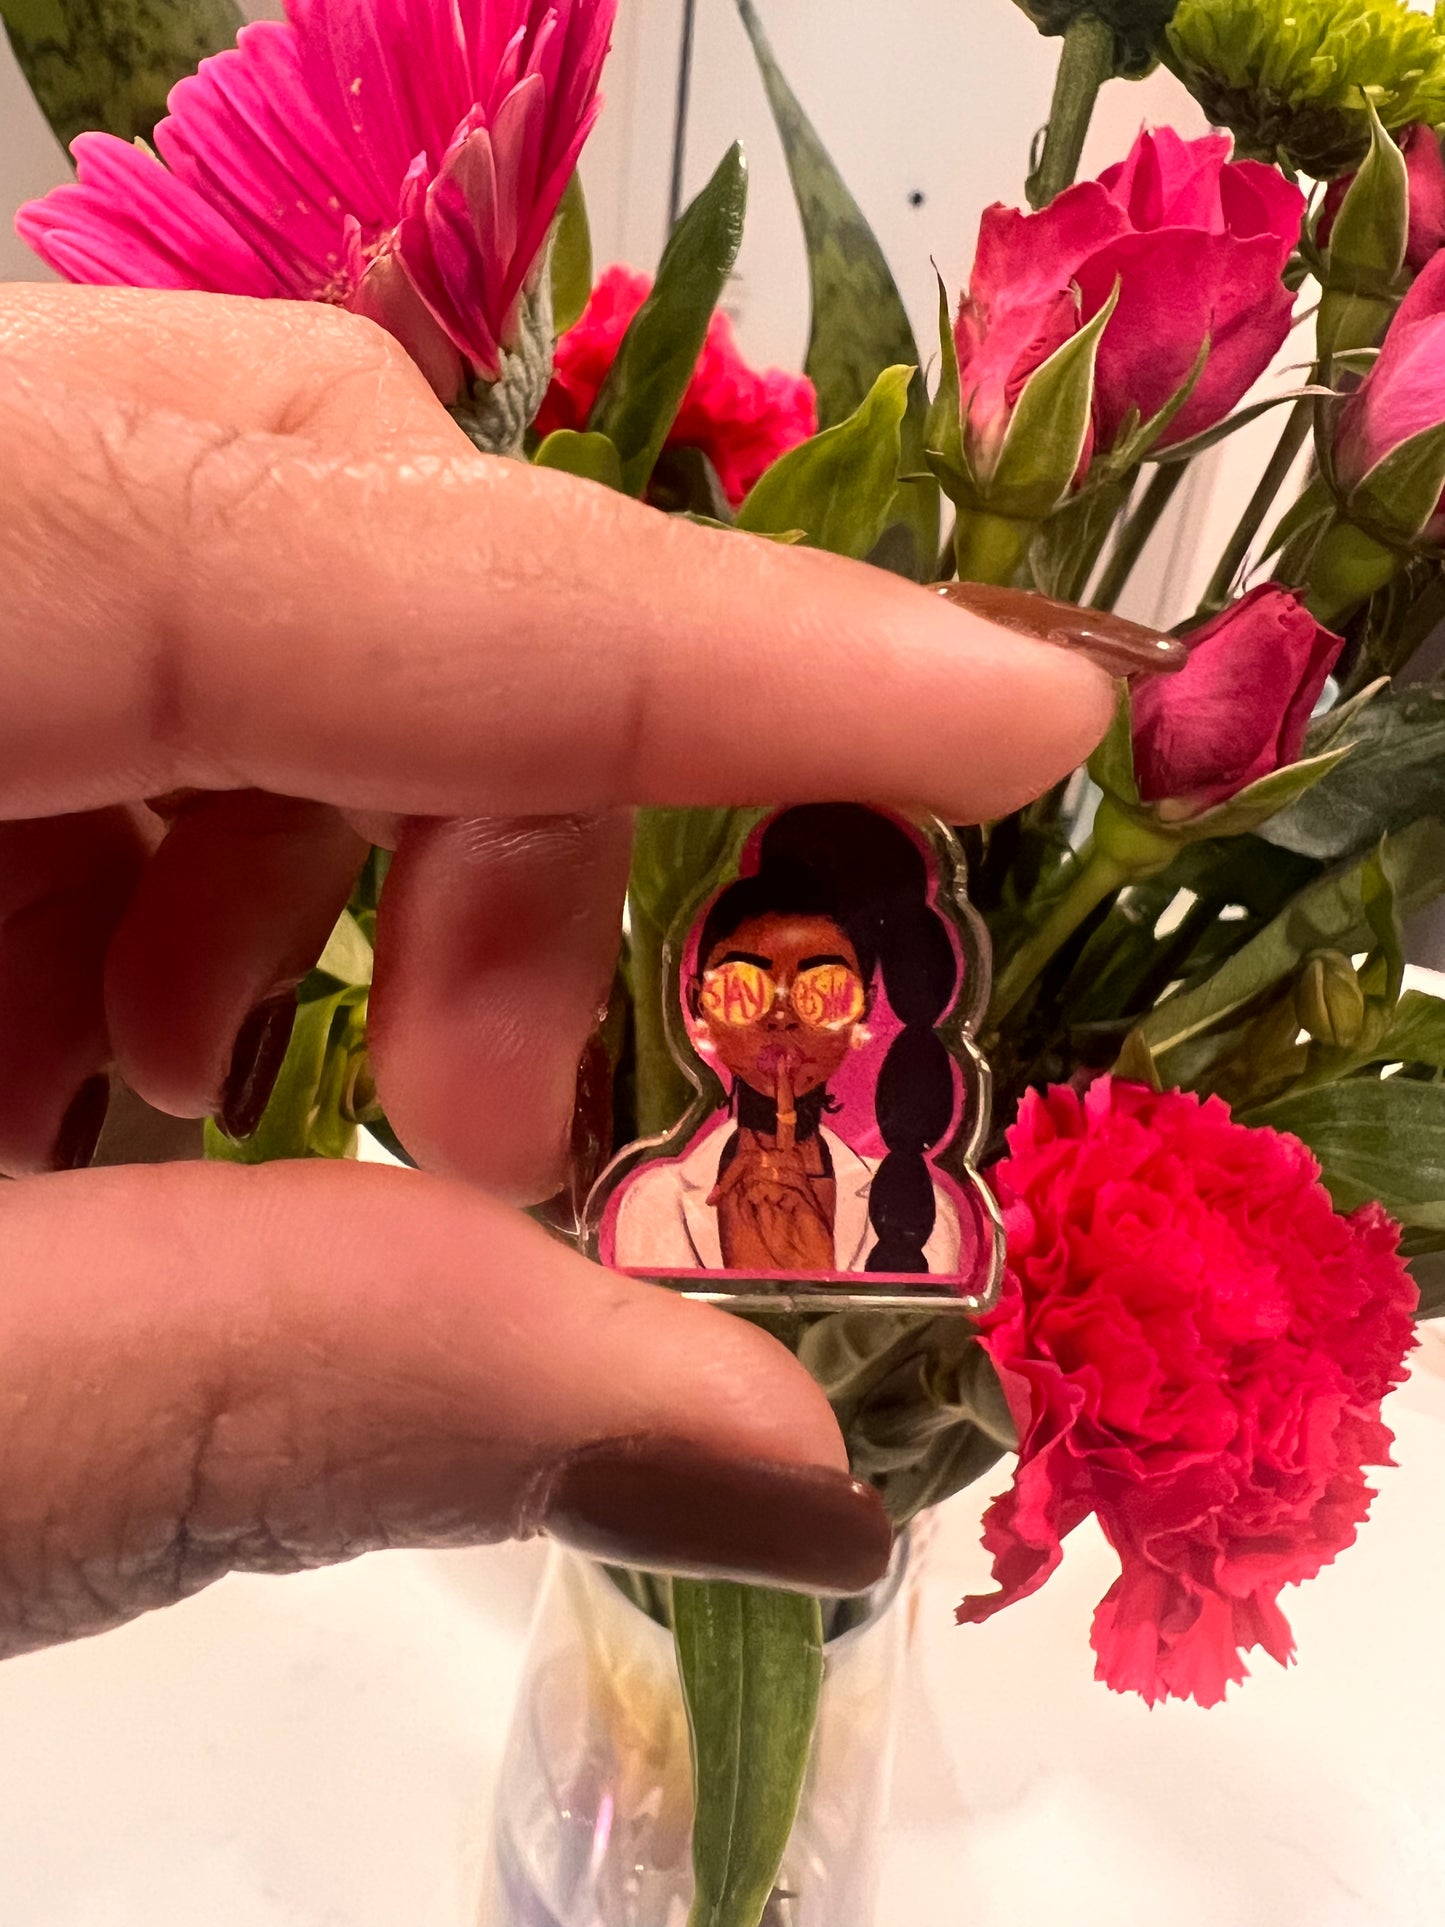 A stylish and empowering acrylic pin featuring the intricate illustration of a confident Black woman. The design showcases cultural pride, beauty, and strength, with rich details in hair, attire, and expression, making it a statement accessory for self-expression and celebration of diversity